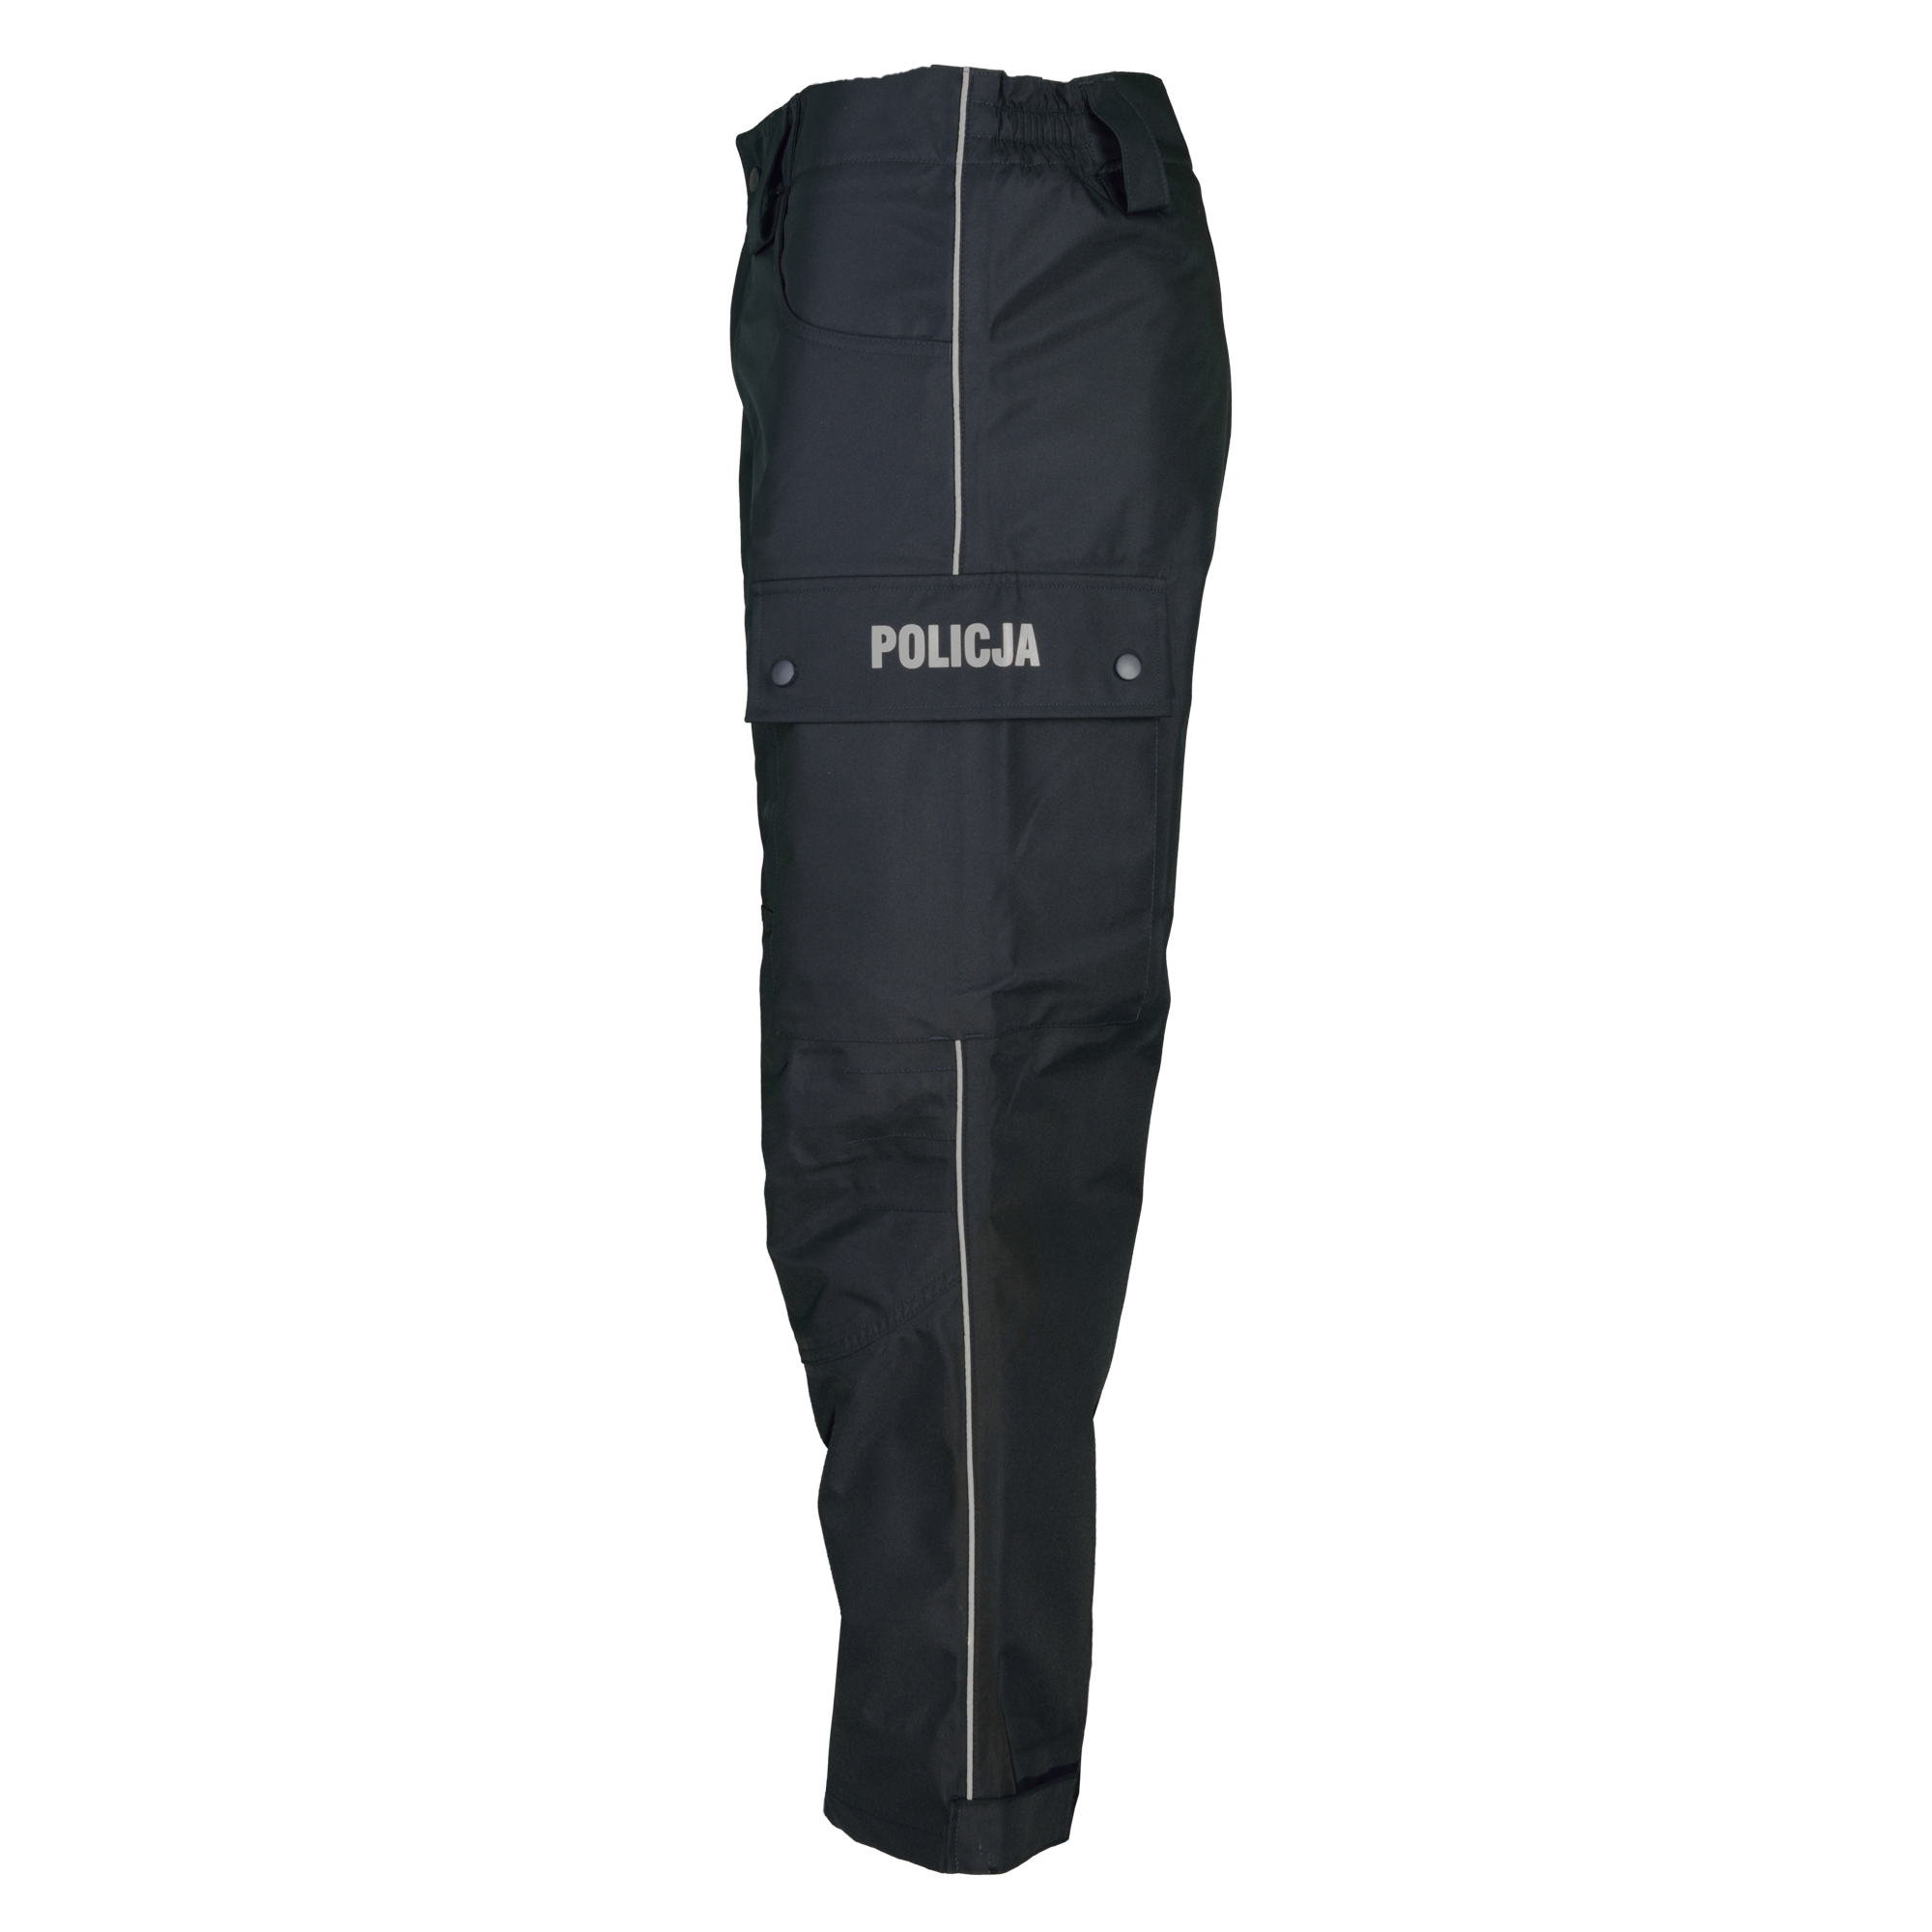 Winter official trousers